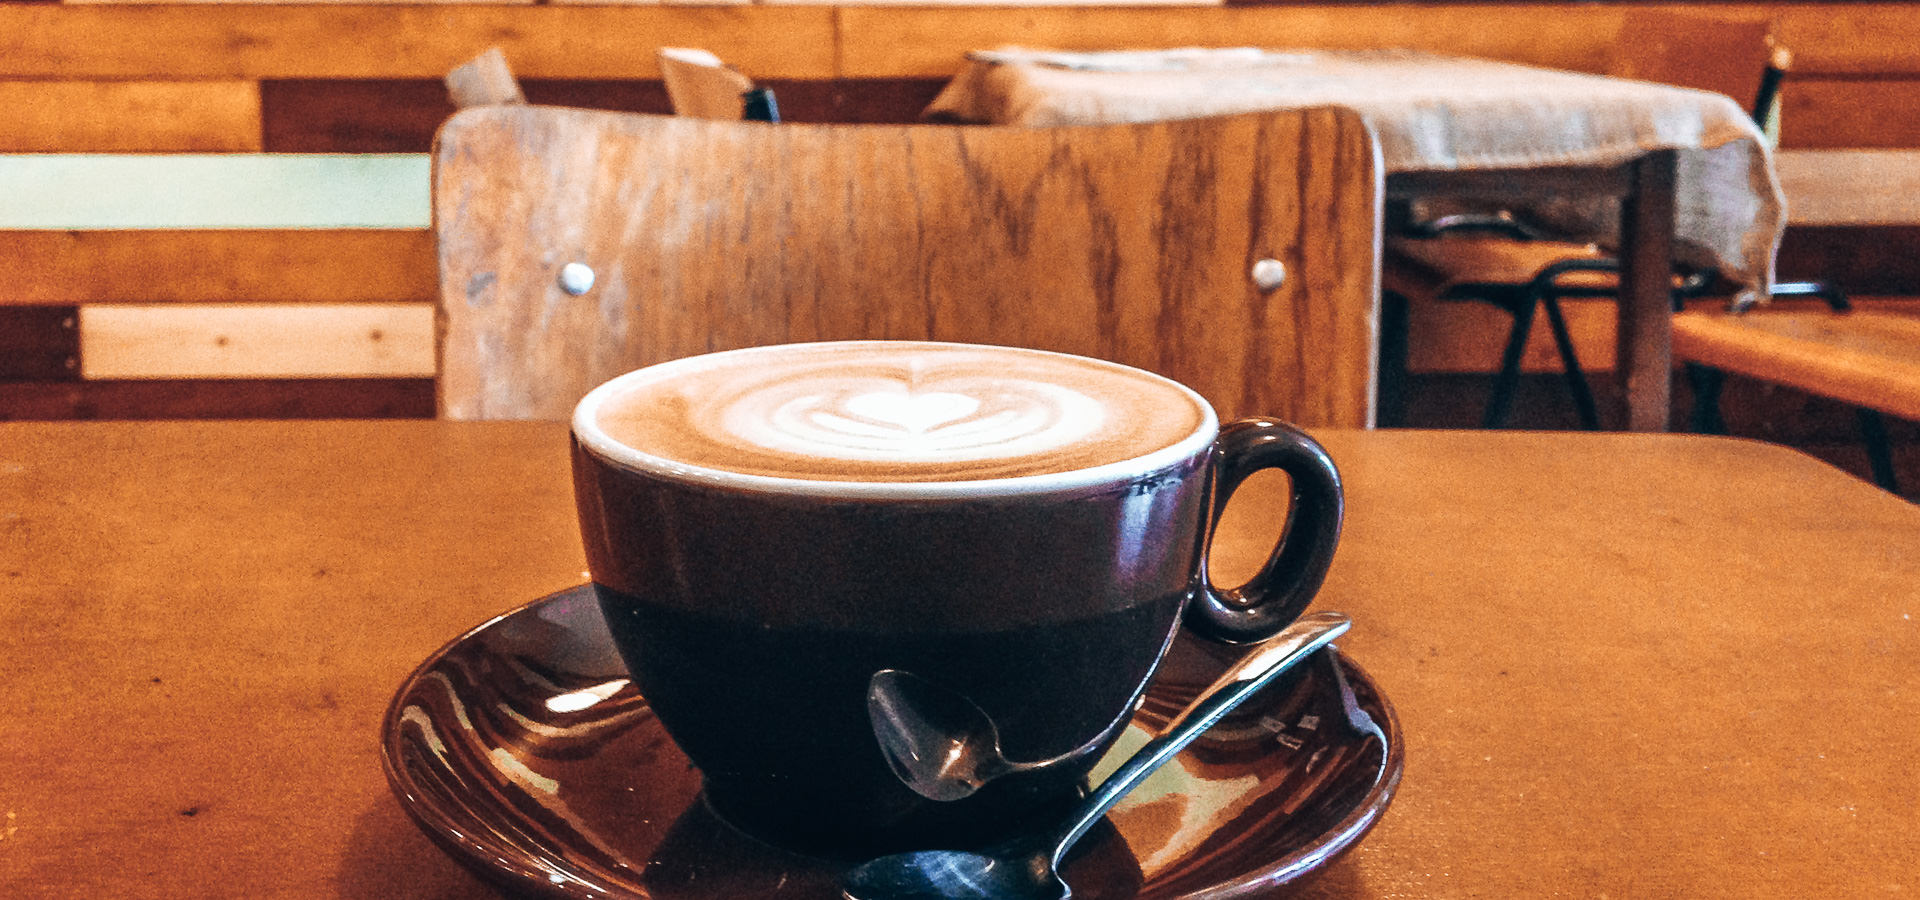 Best Specialty Coffee Amsterdam: 9 Unmissable Cafes | 48 hours in edinburgh 5